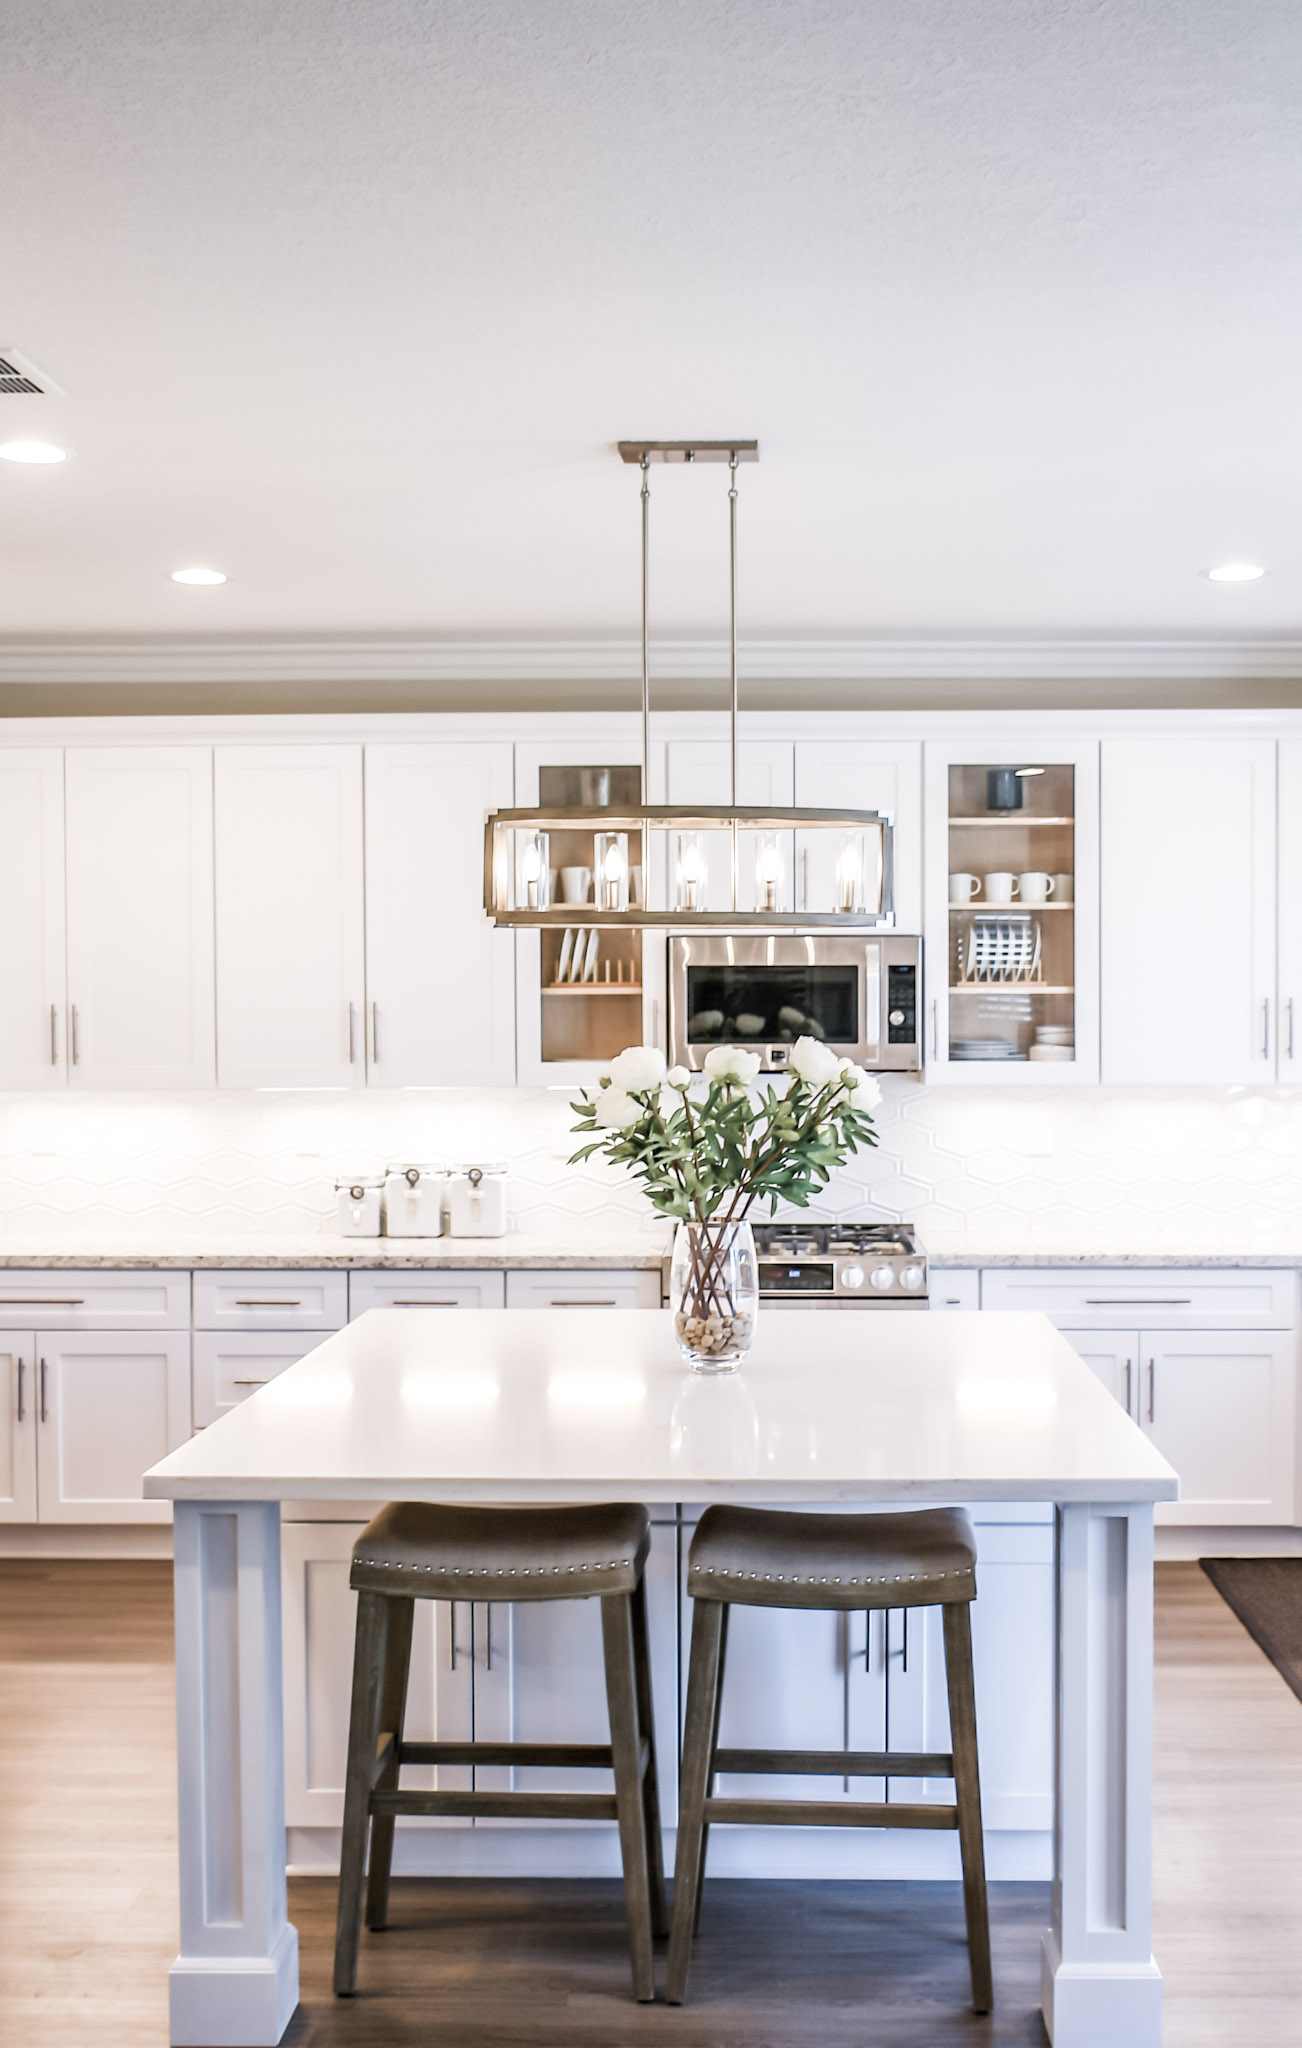 A beautiful, bright, and modern kitchen is shown. This article covers how to maintain the hygiene of your home from maximum health.